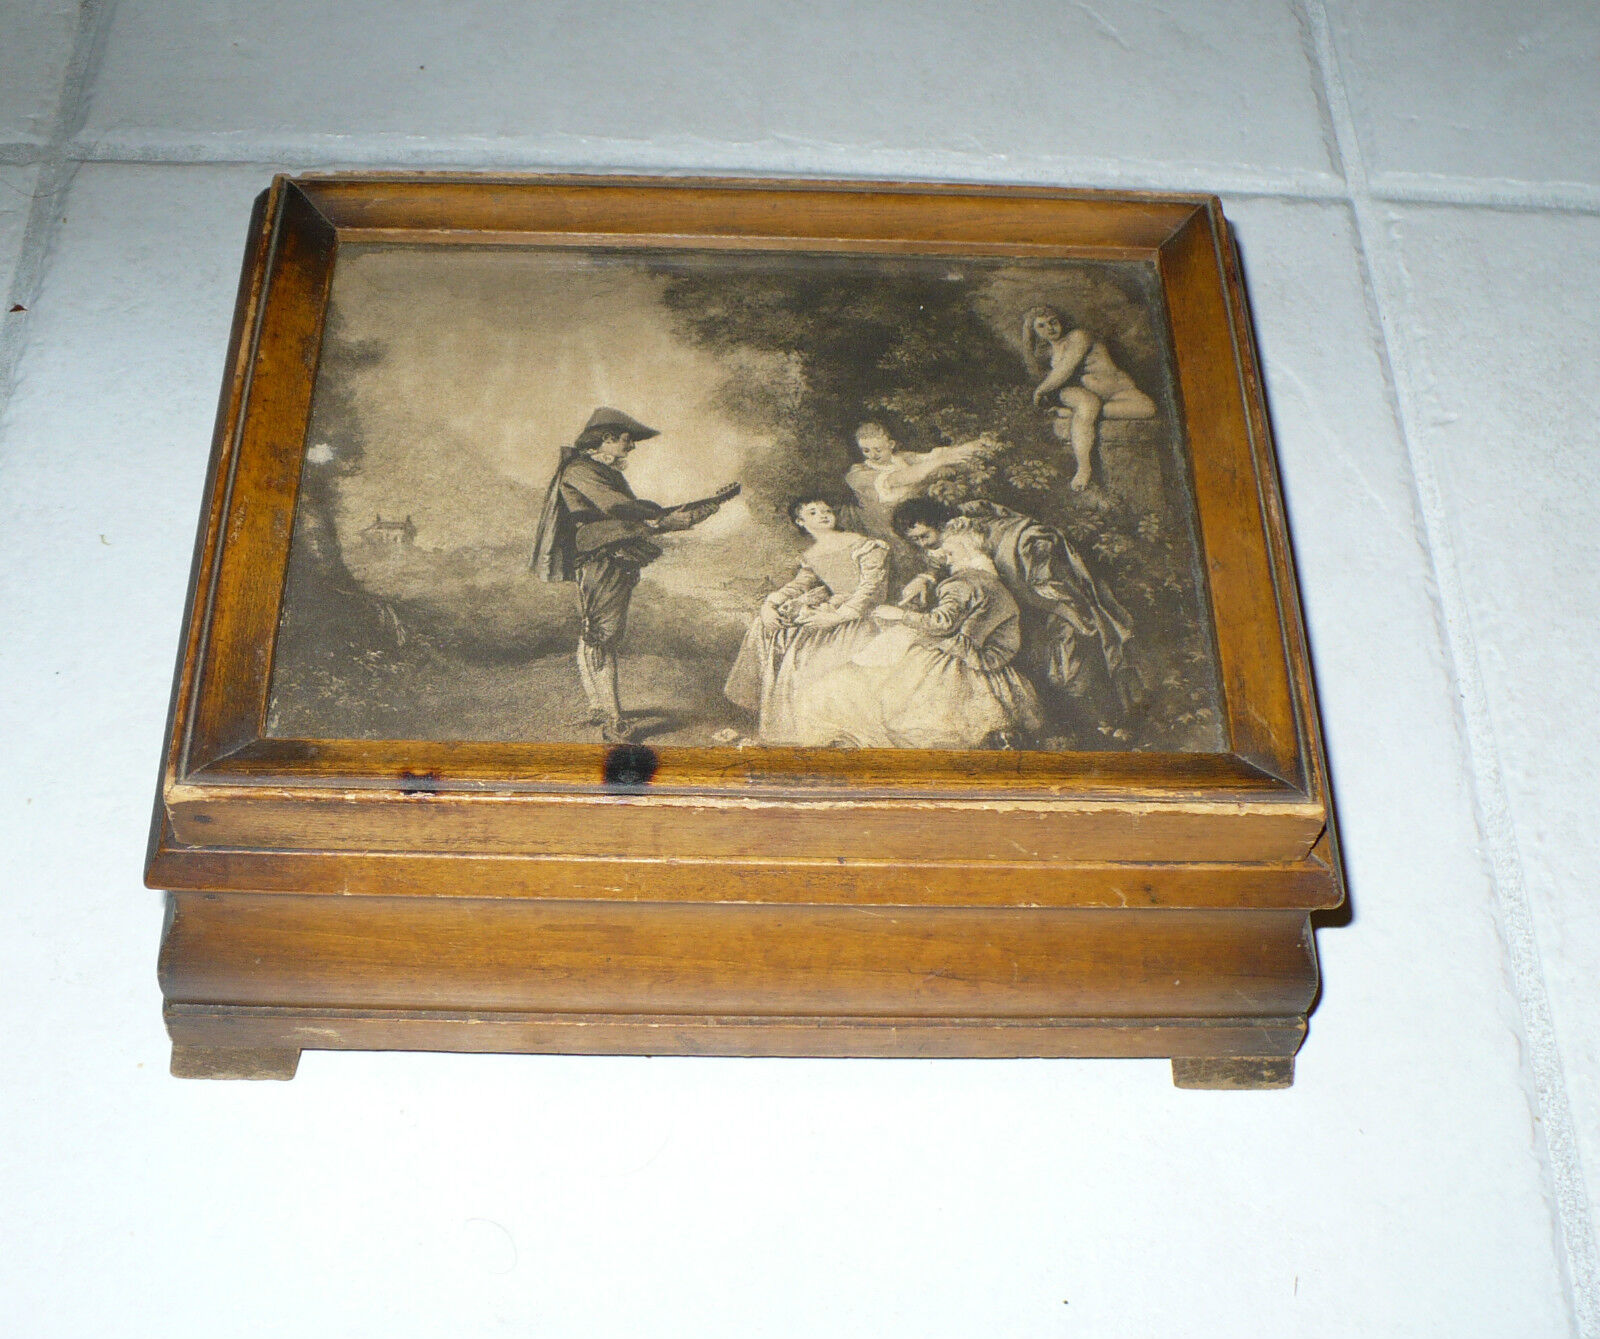 ANTIQUE WOOD BOX ETCHING ? ROCOCO STYLE JEAN ANTOINE WATTEAU LESSONS OF LOVE 